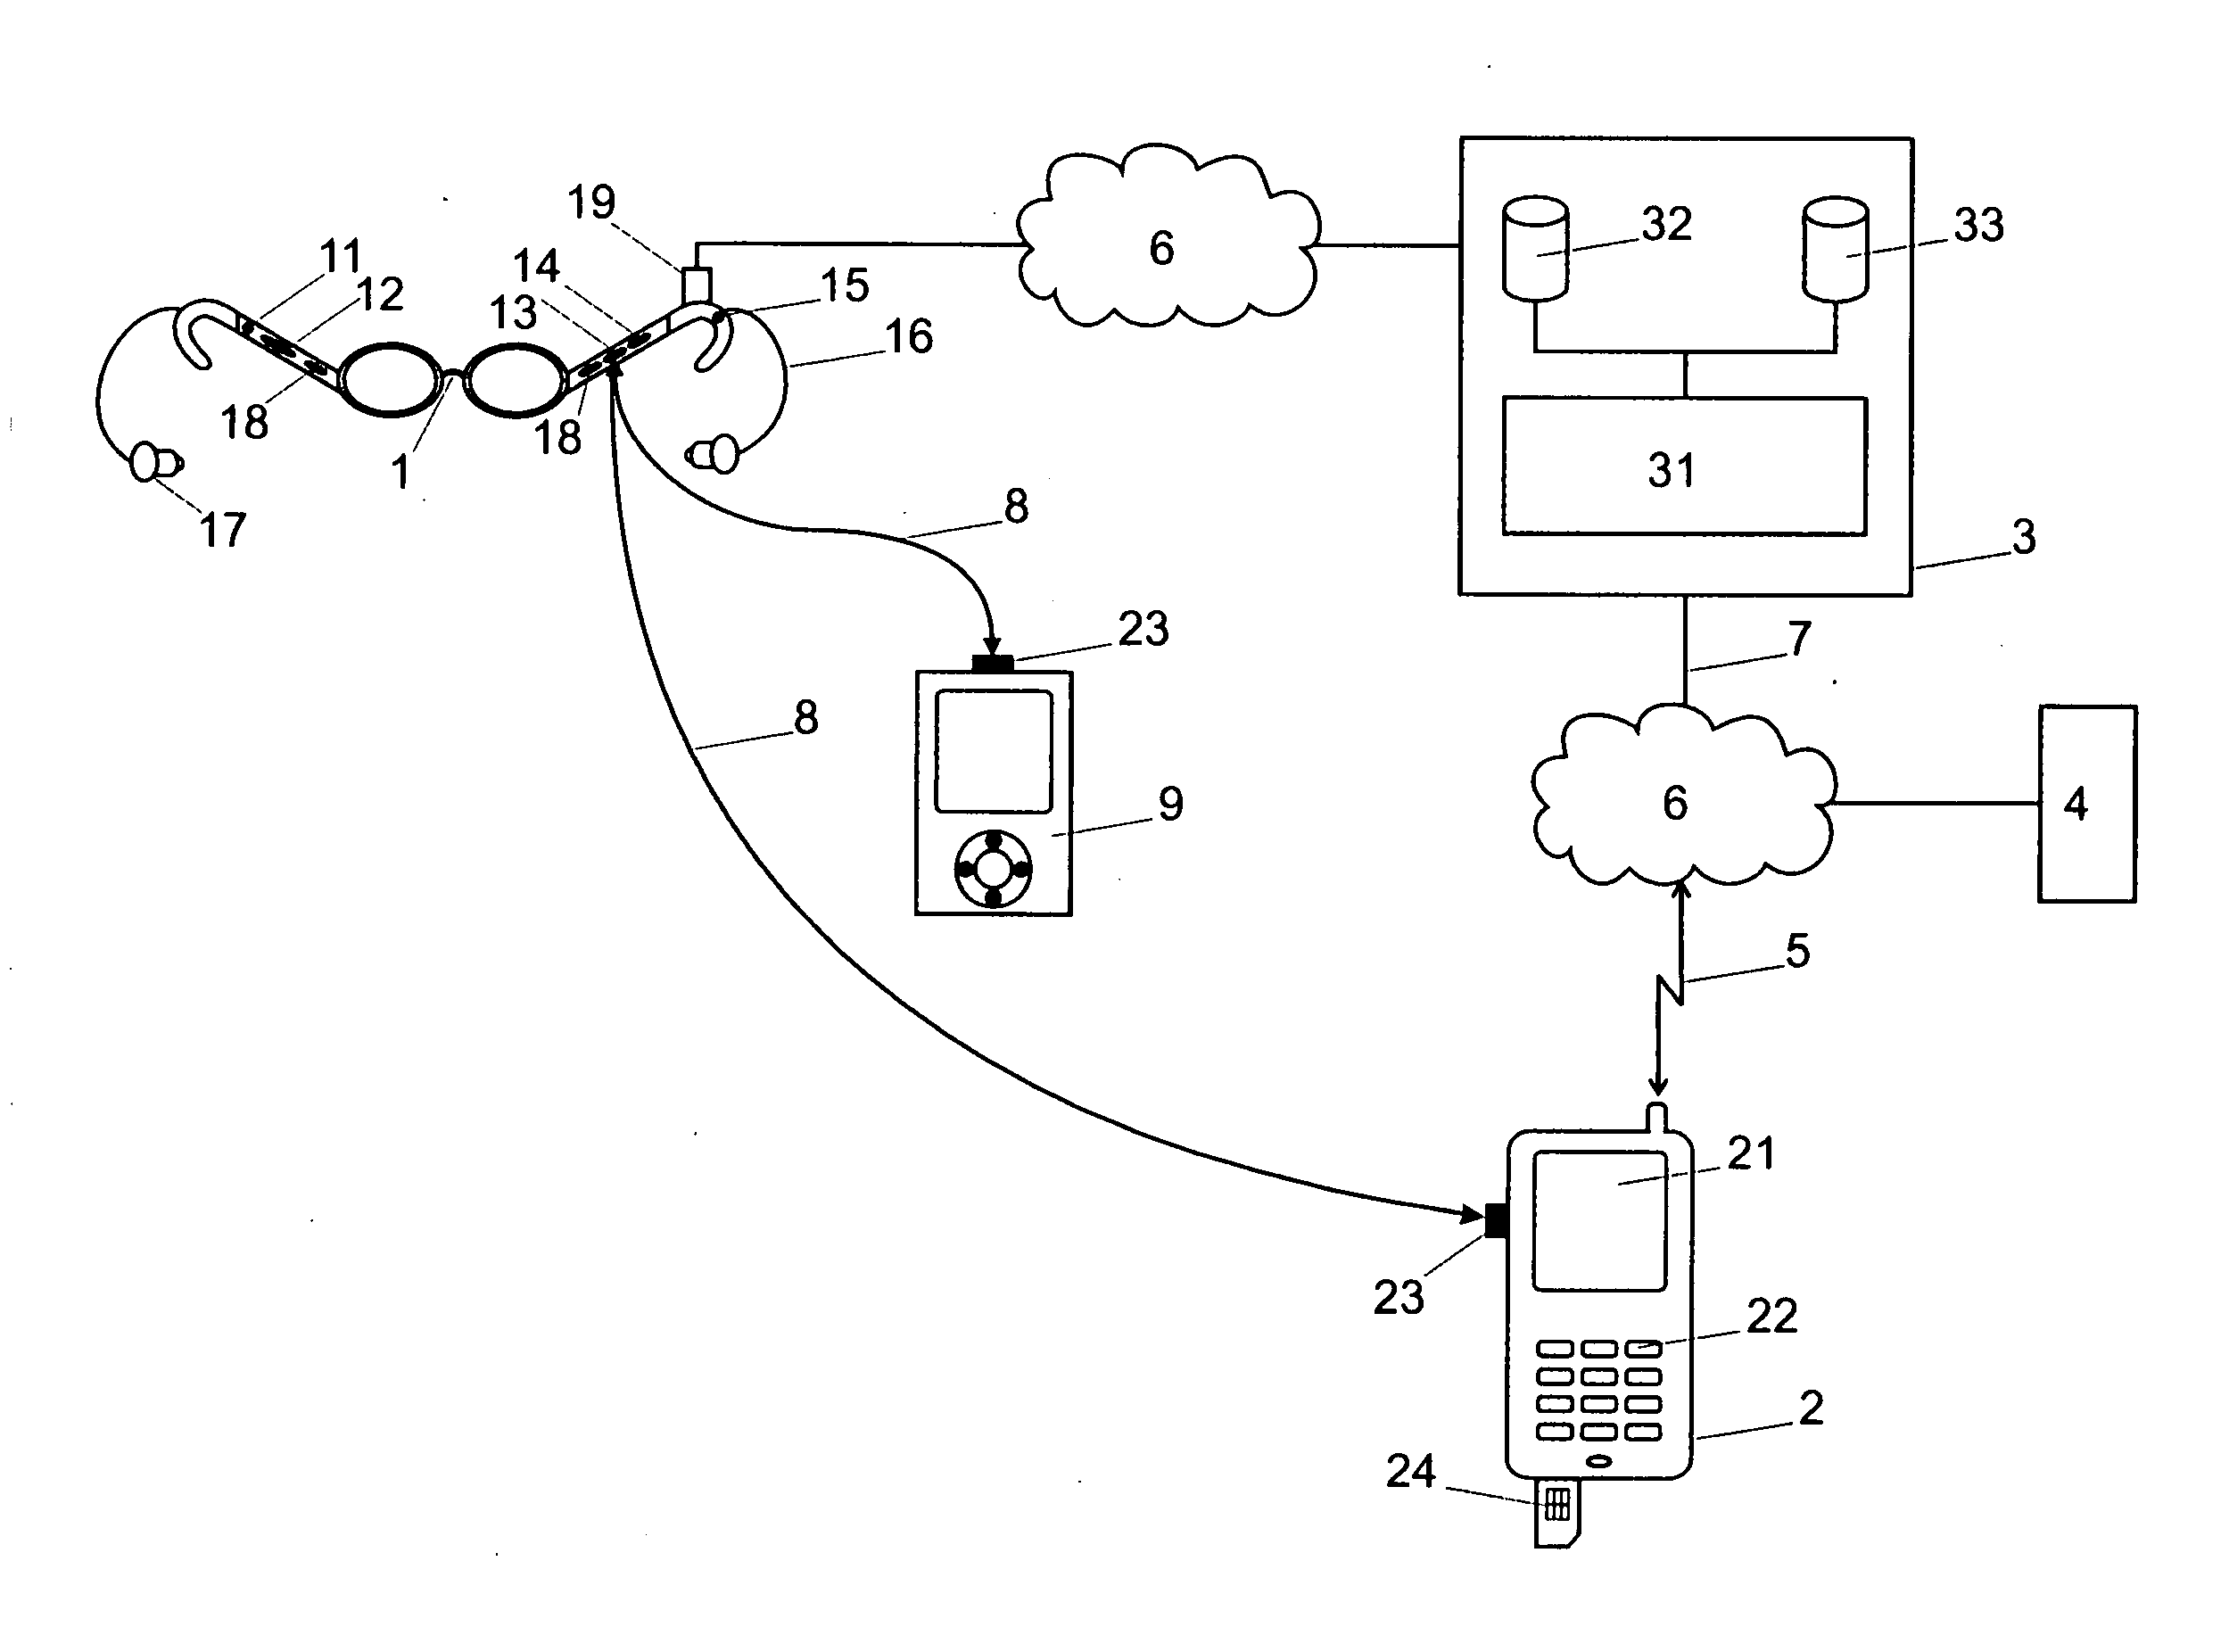 Communication device, system and method